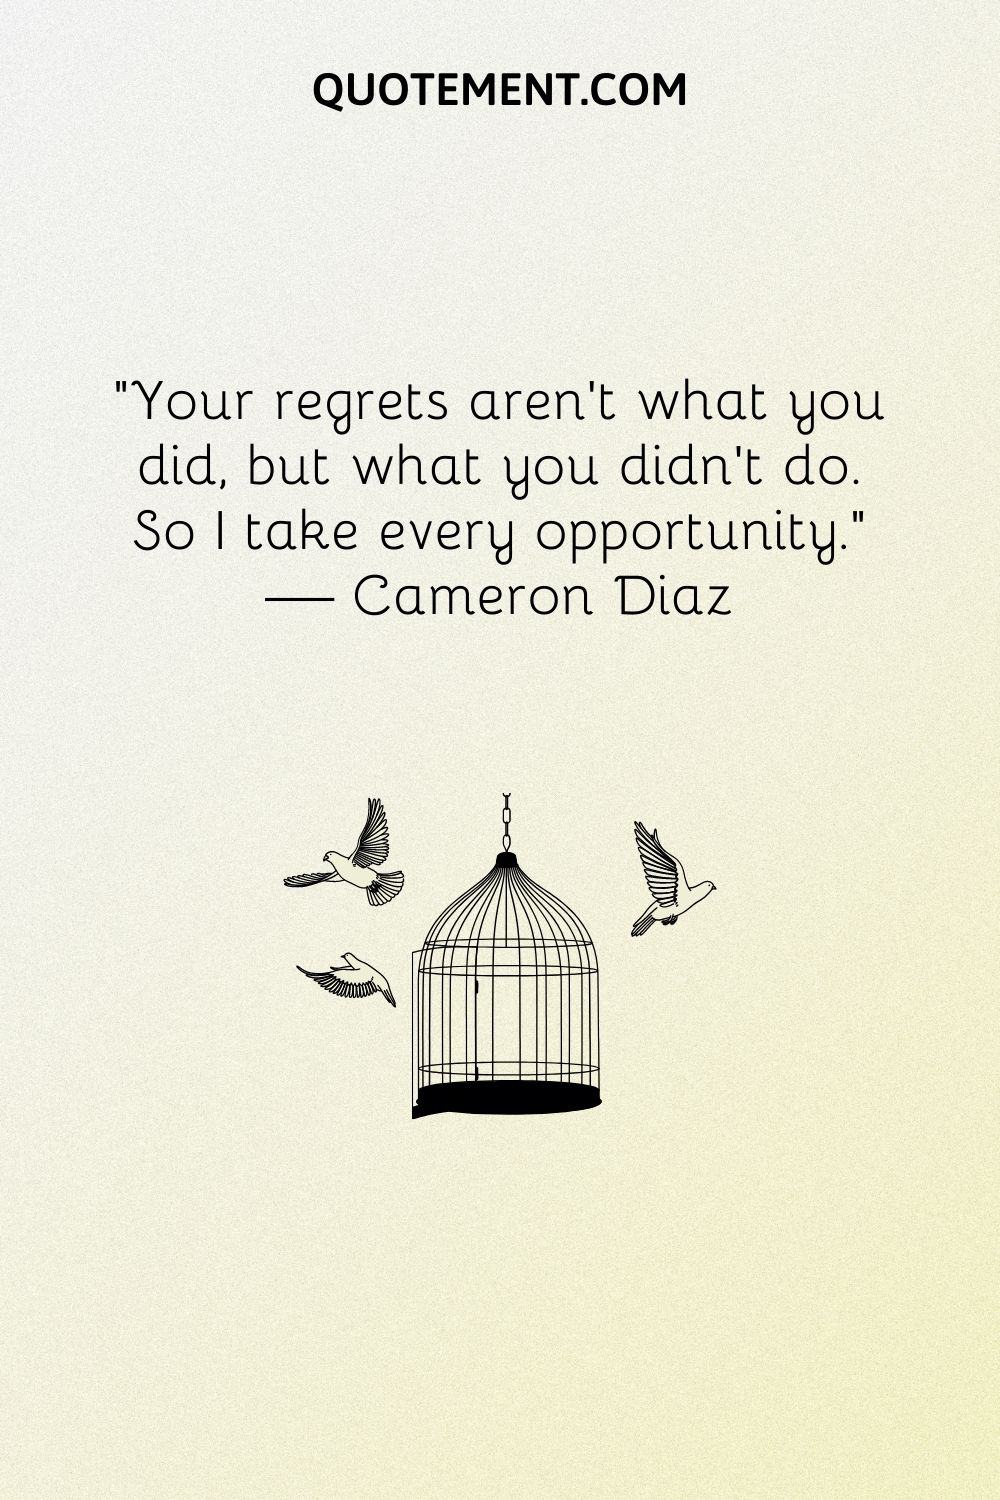 Your regrets aren't what you did, but what you didn't do. So I take every opportunity